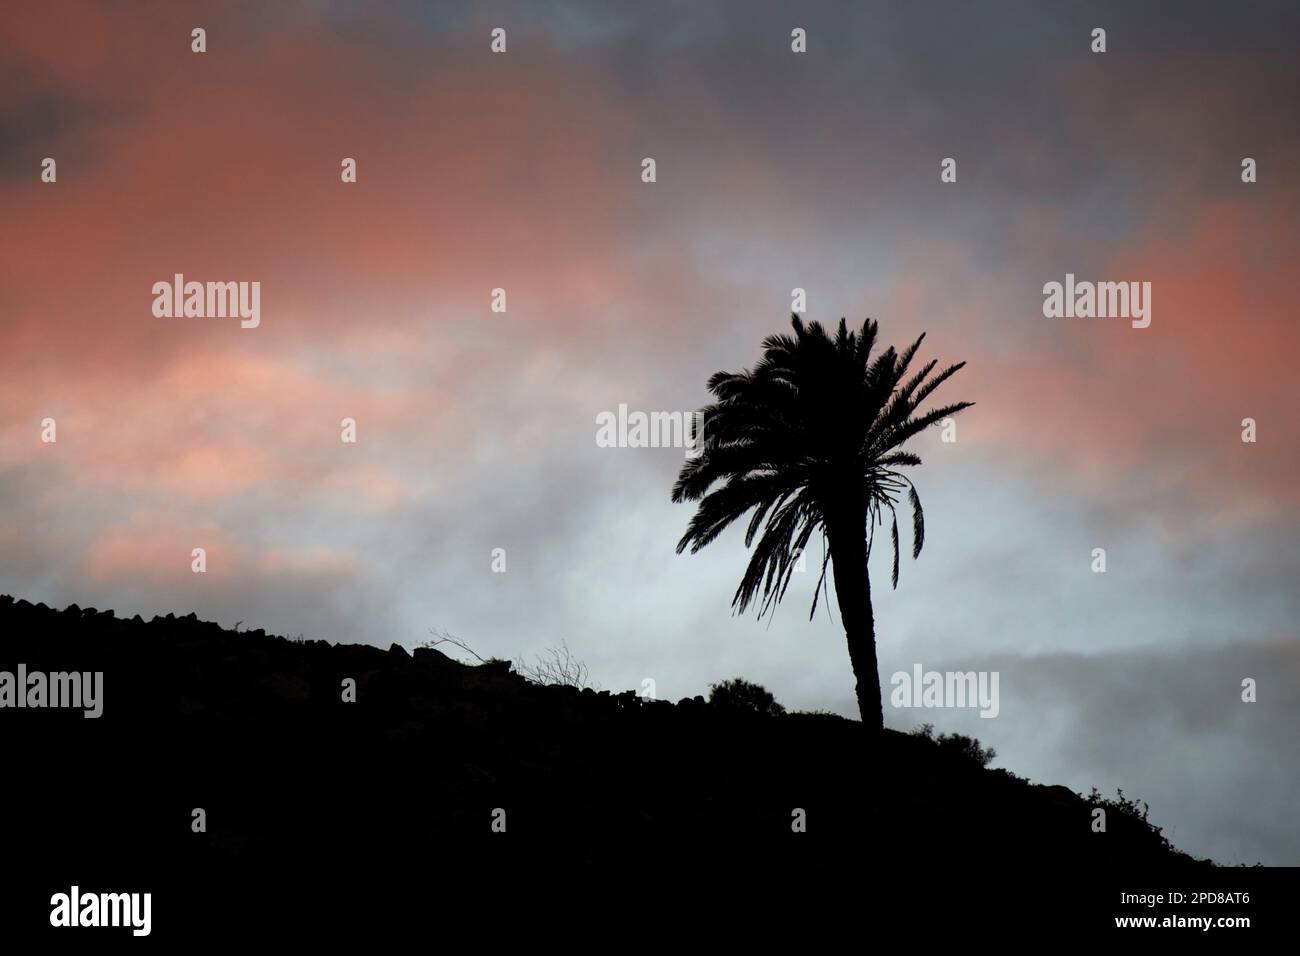 lone canarian pine tree phoenix canariensis silhouetted against a red cloudy setting sun sky Lanzarote, Canary Islands, Spain Stock Photo